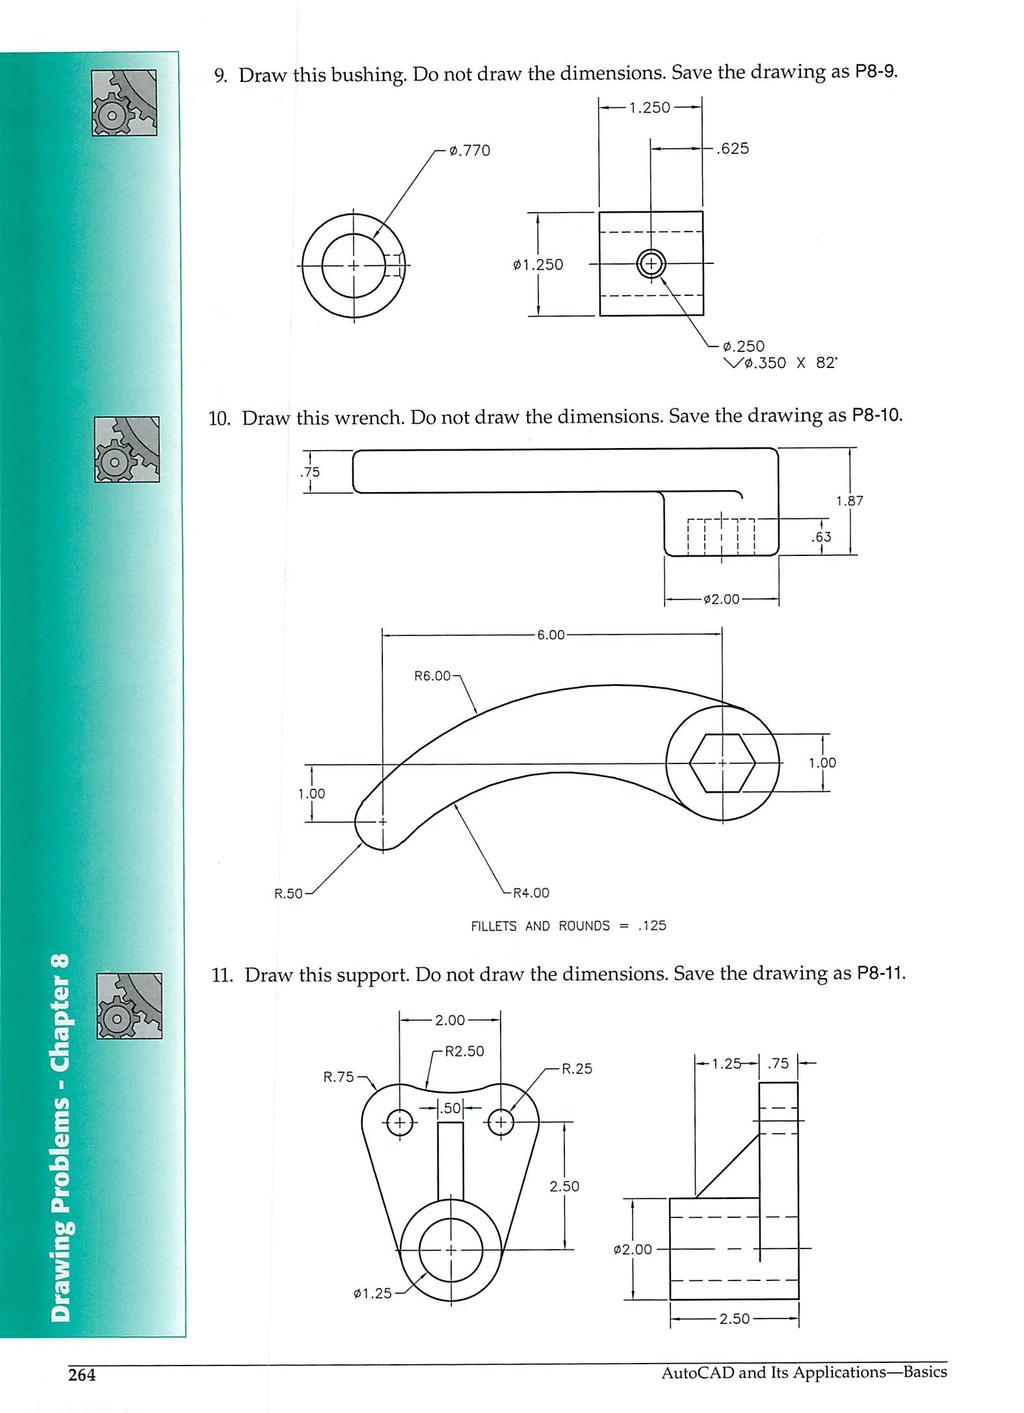 9. Draw this bushing. Donot draw the dimensions. Save the drawing as P8-9. & 0.770-1.250- --.625 01.250 10. Draw this wrench. Do not draw the dimensions. Save the drawing as P8-10. 1.00 R.50 R4.